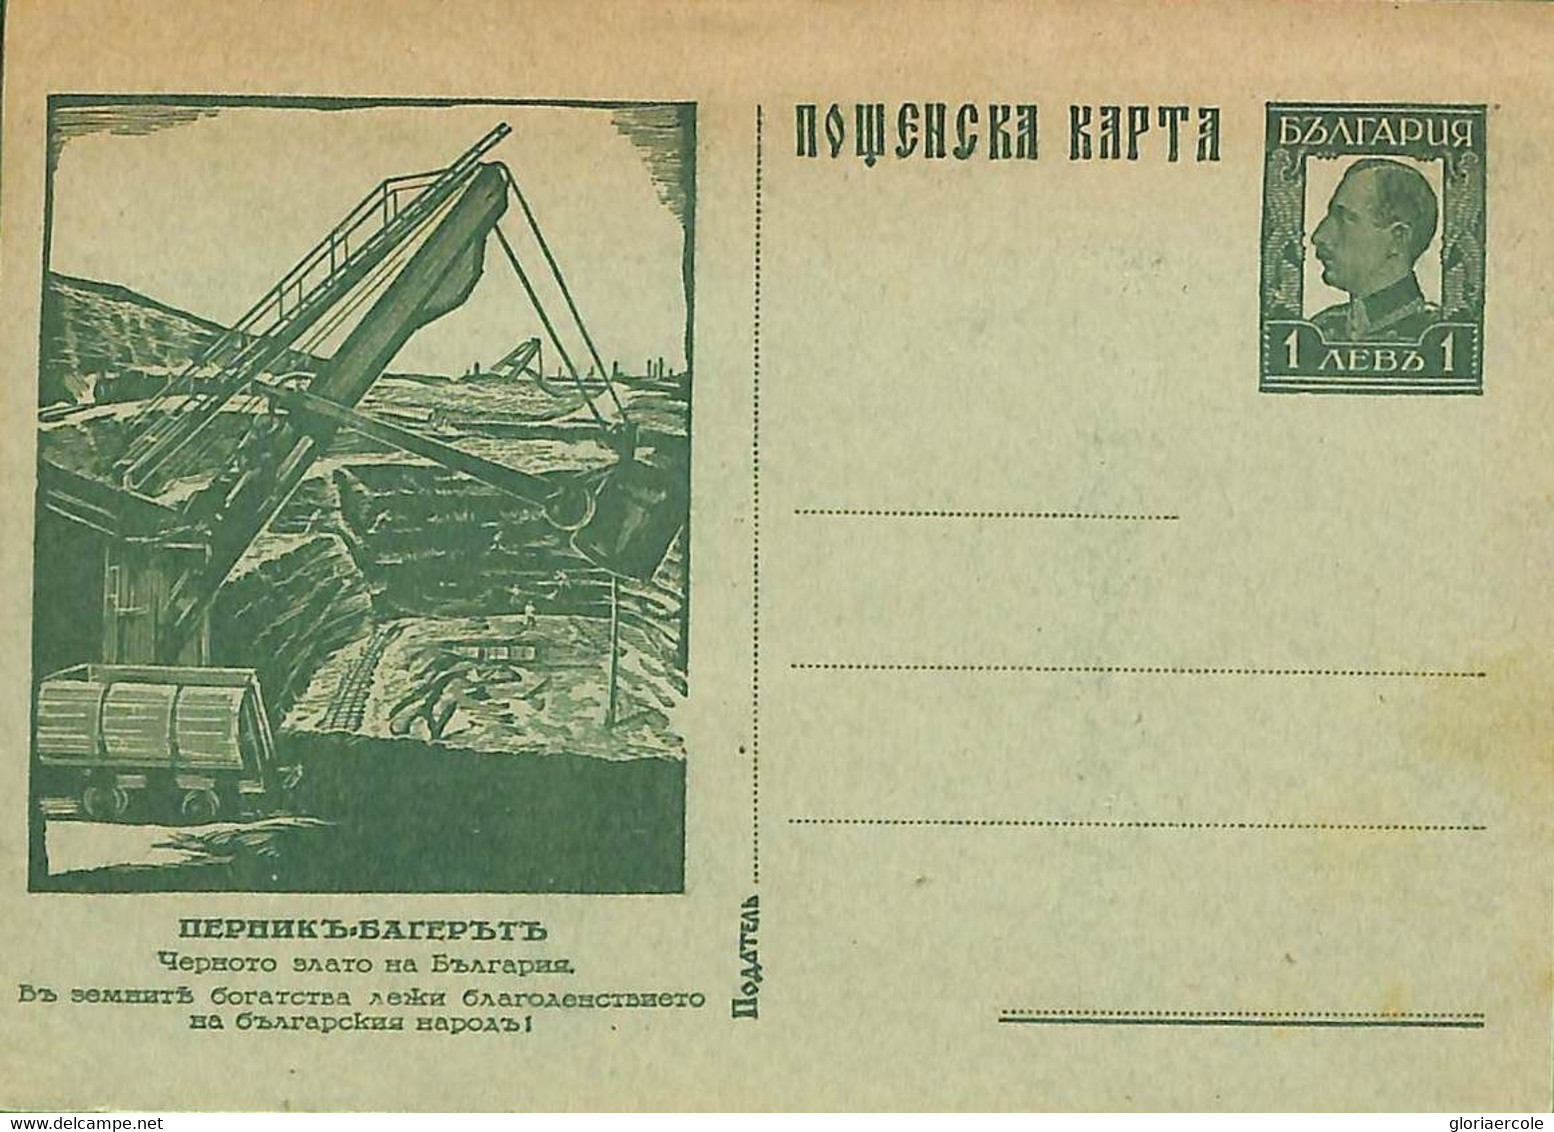 Ad5851 - BULGARIA - Postal History - Picture STATIONERY CARD  1930's BRIDGE - Postcards